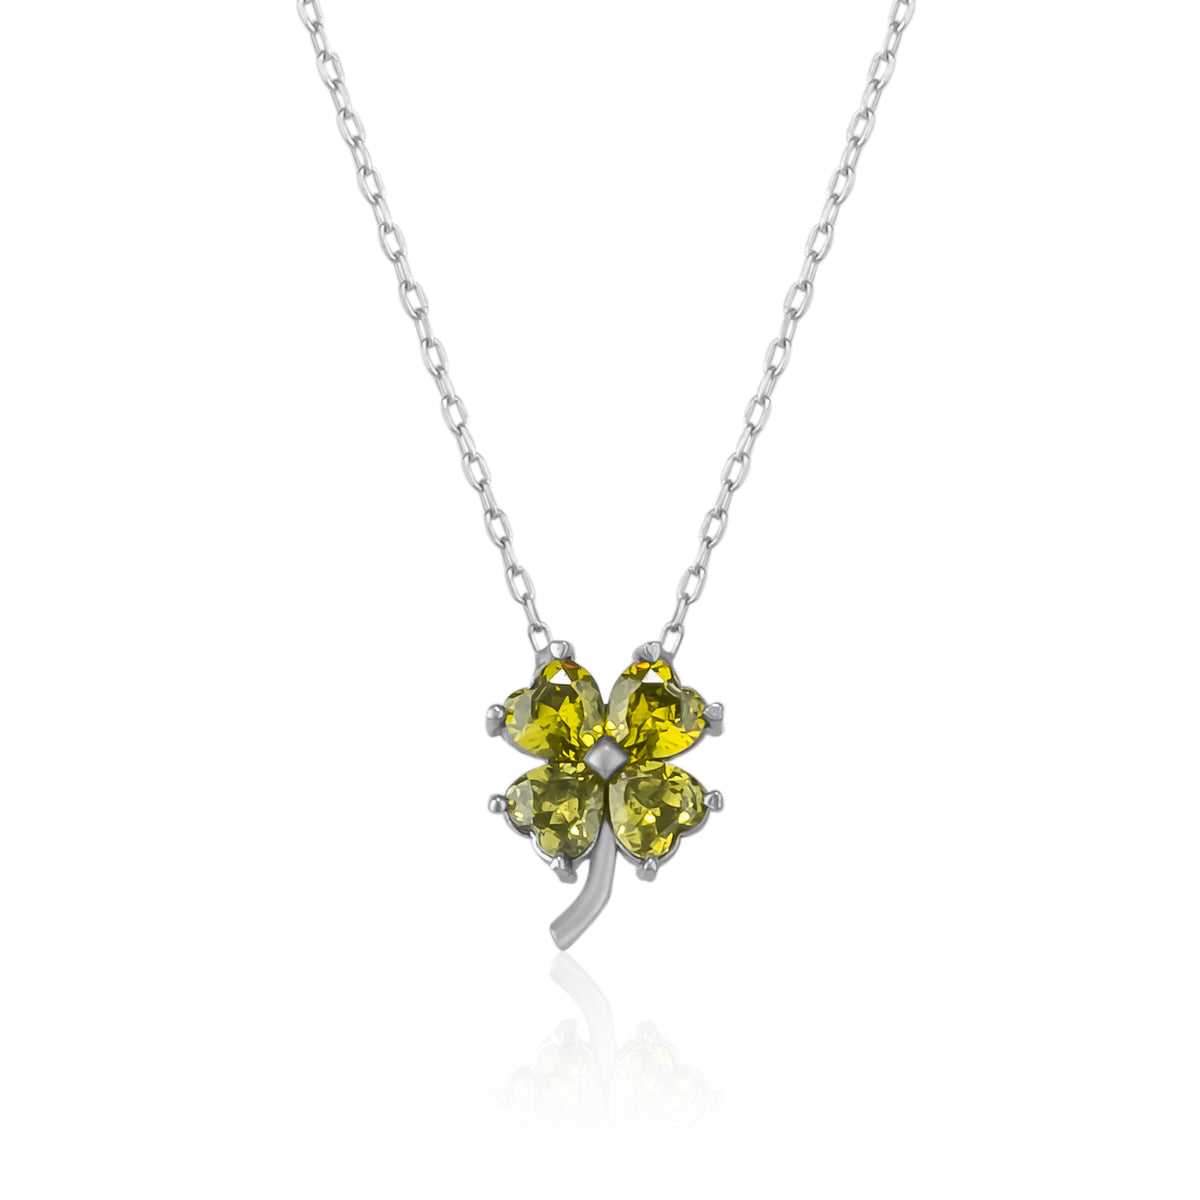 Four Leaf Clover Sterling Silver Necklace - Mystic Green